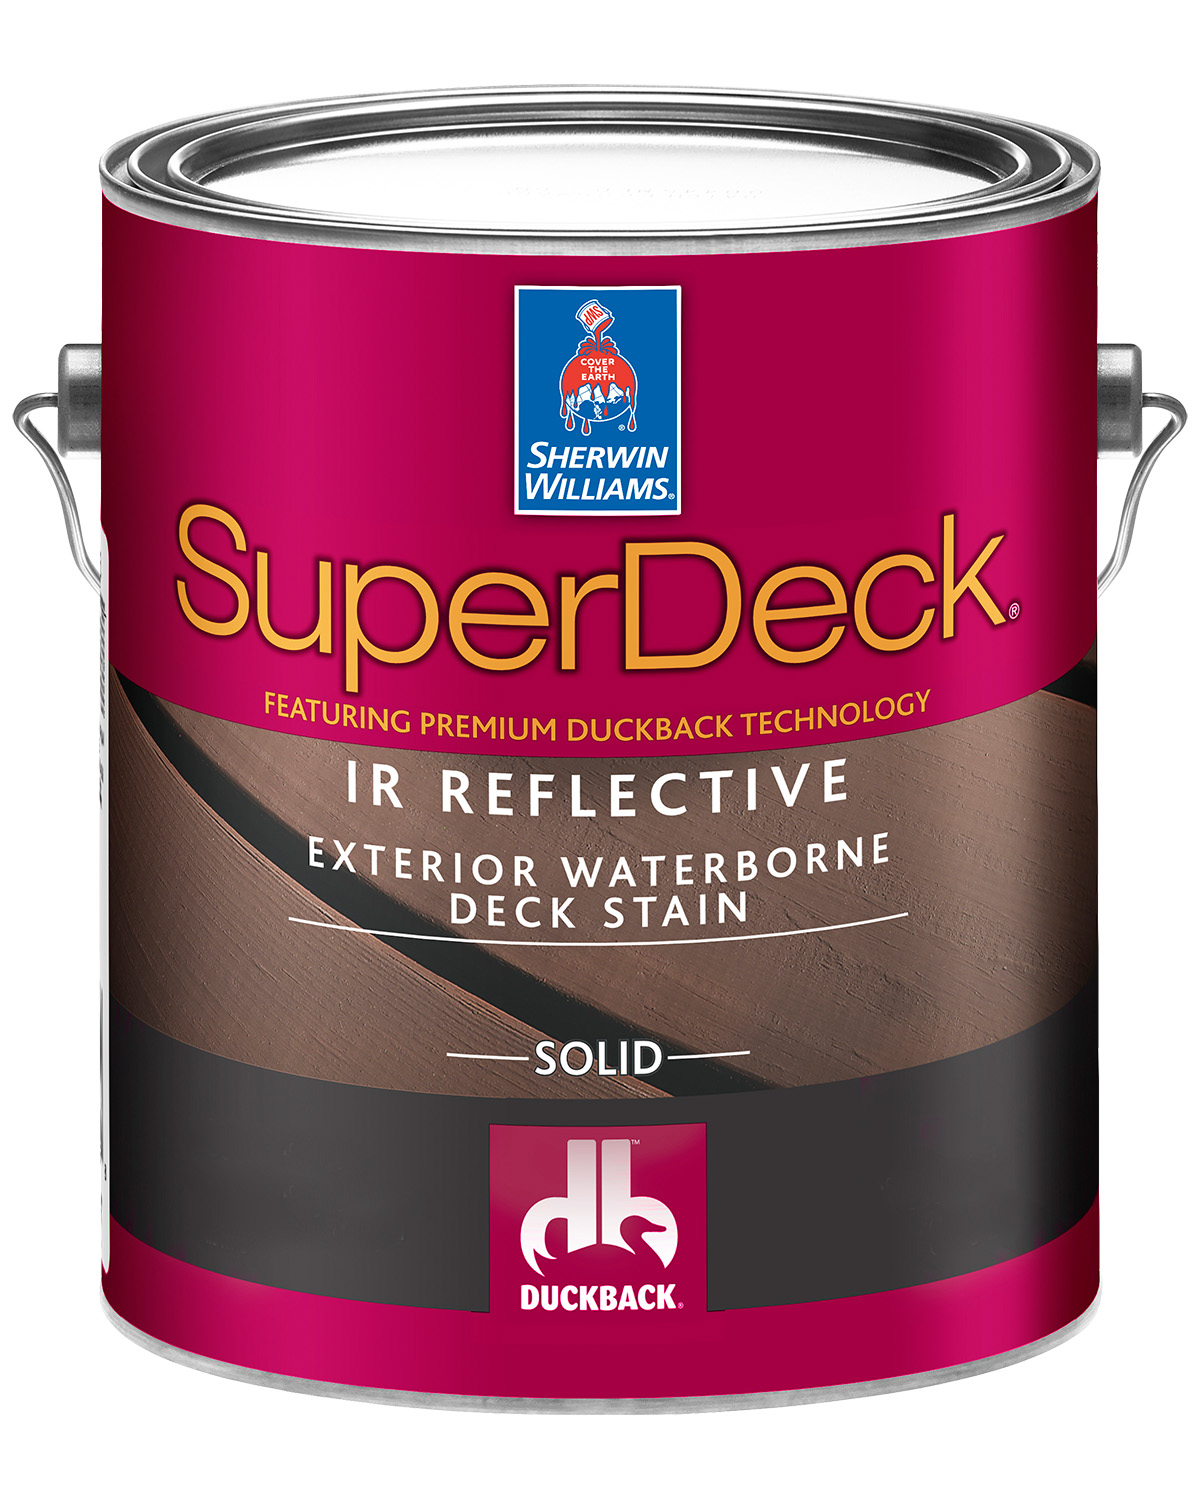 New Sherwin-Williams Cool Deck Stain Reduces Surface ...